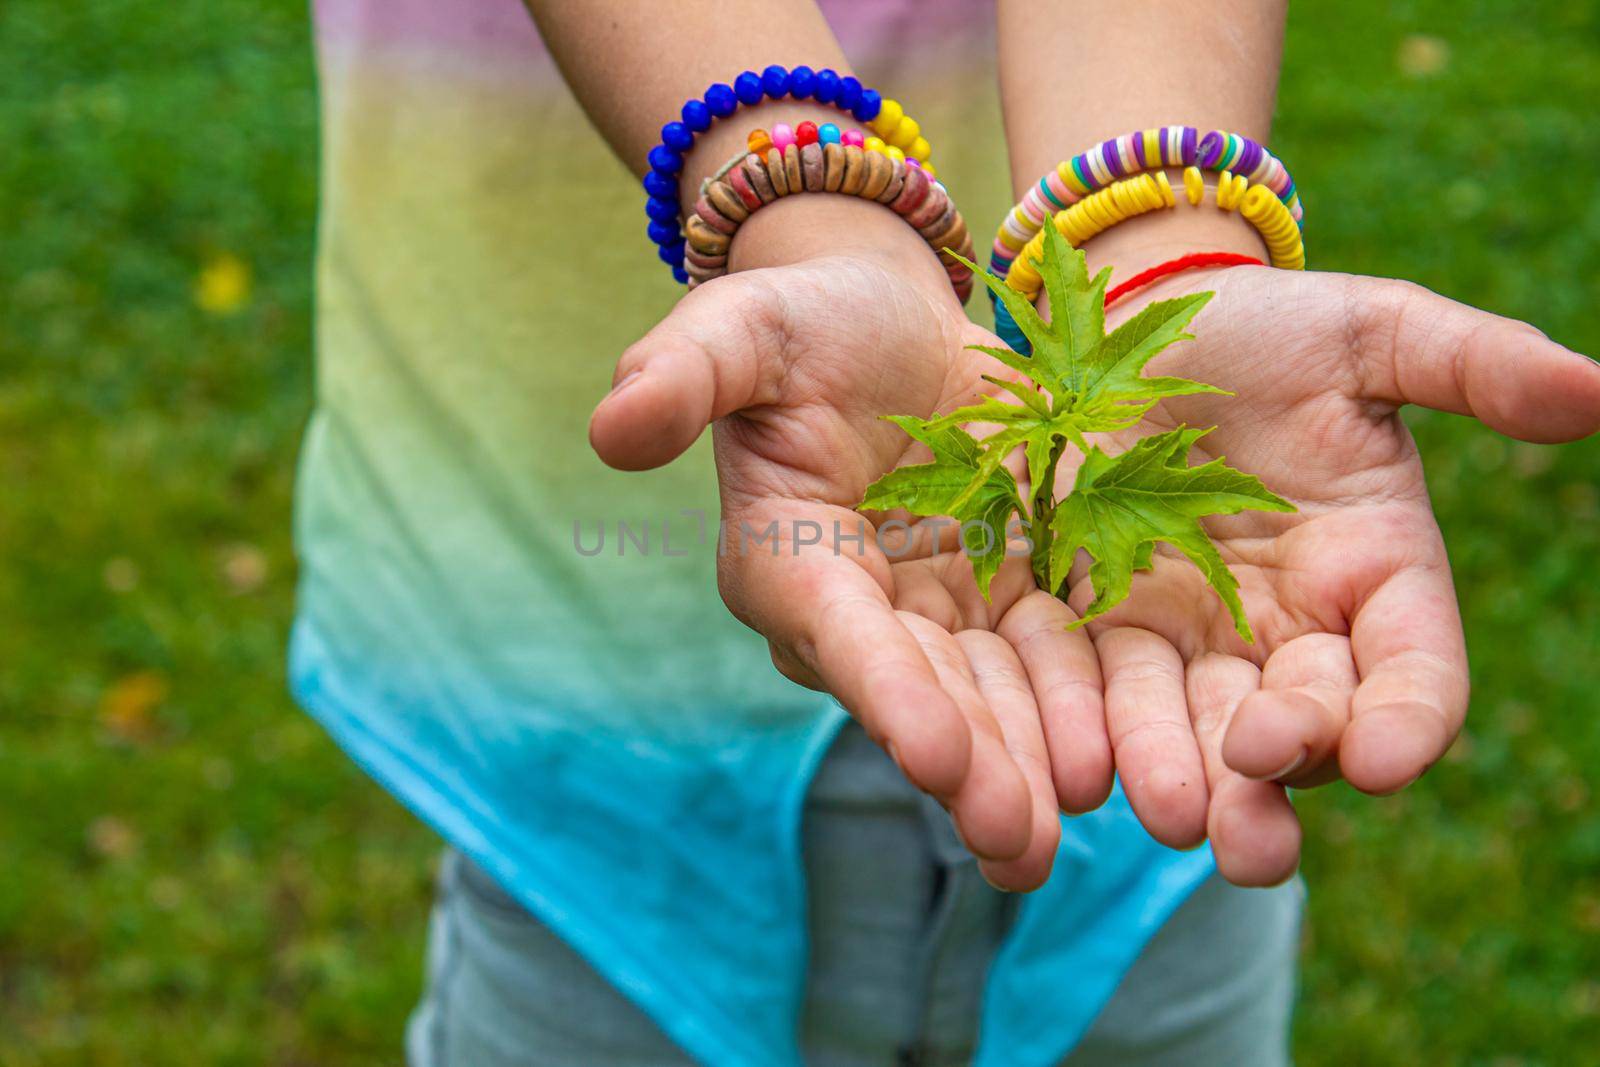 Children take care of nature tree in their hands. Selective focus. nature